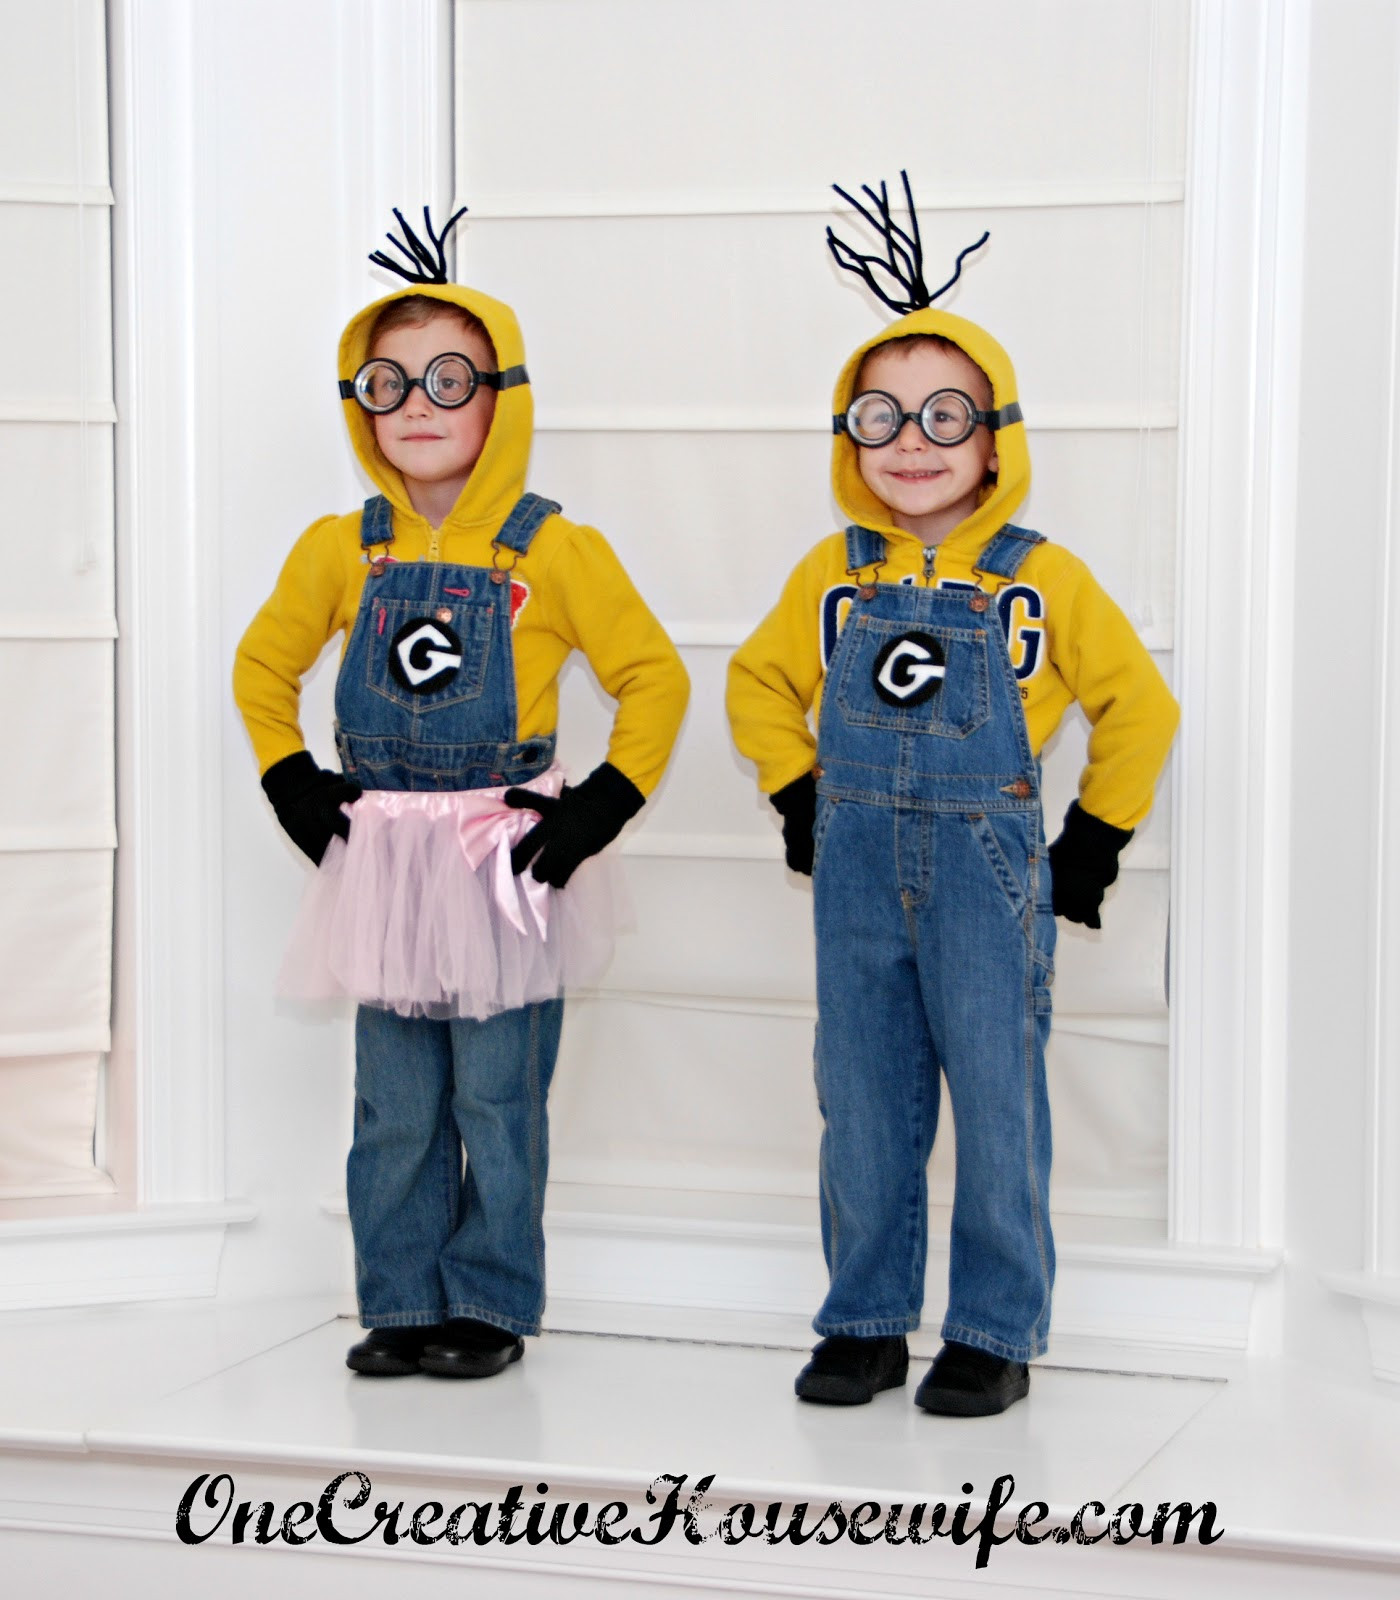 DIY Minion Costumes For Adults
 e Creative Housewife Despicable Me Minion Costumes